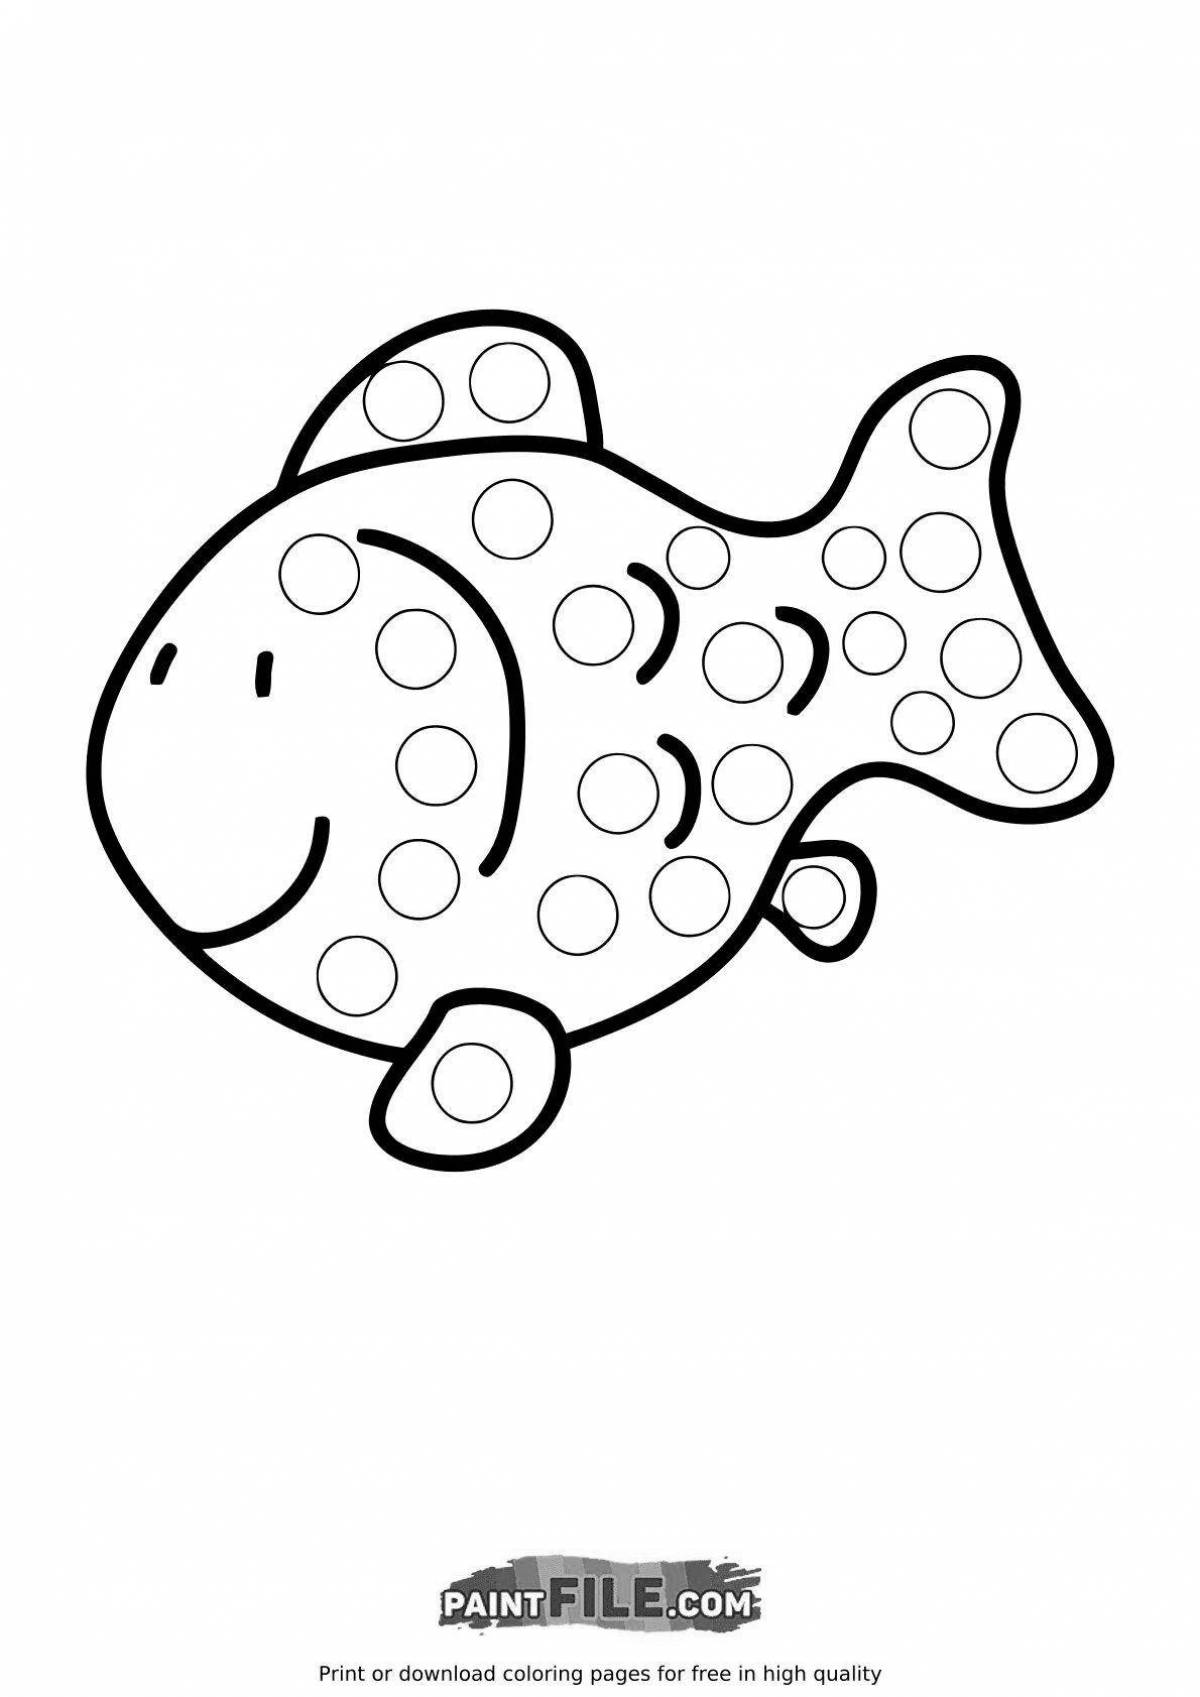 Coloring book dazzling ball fish